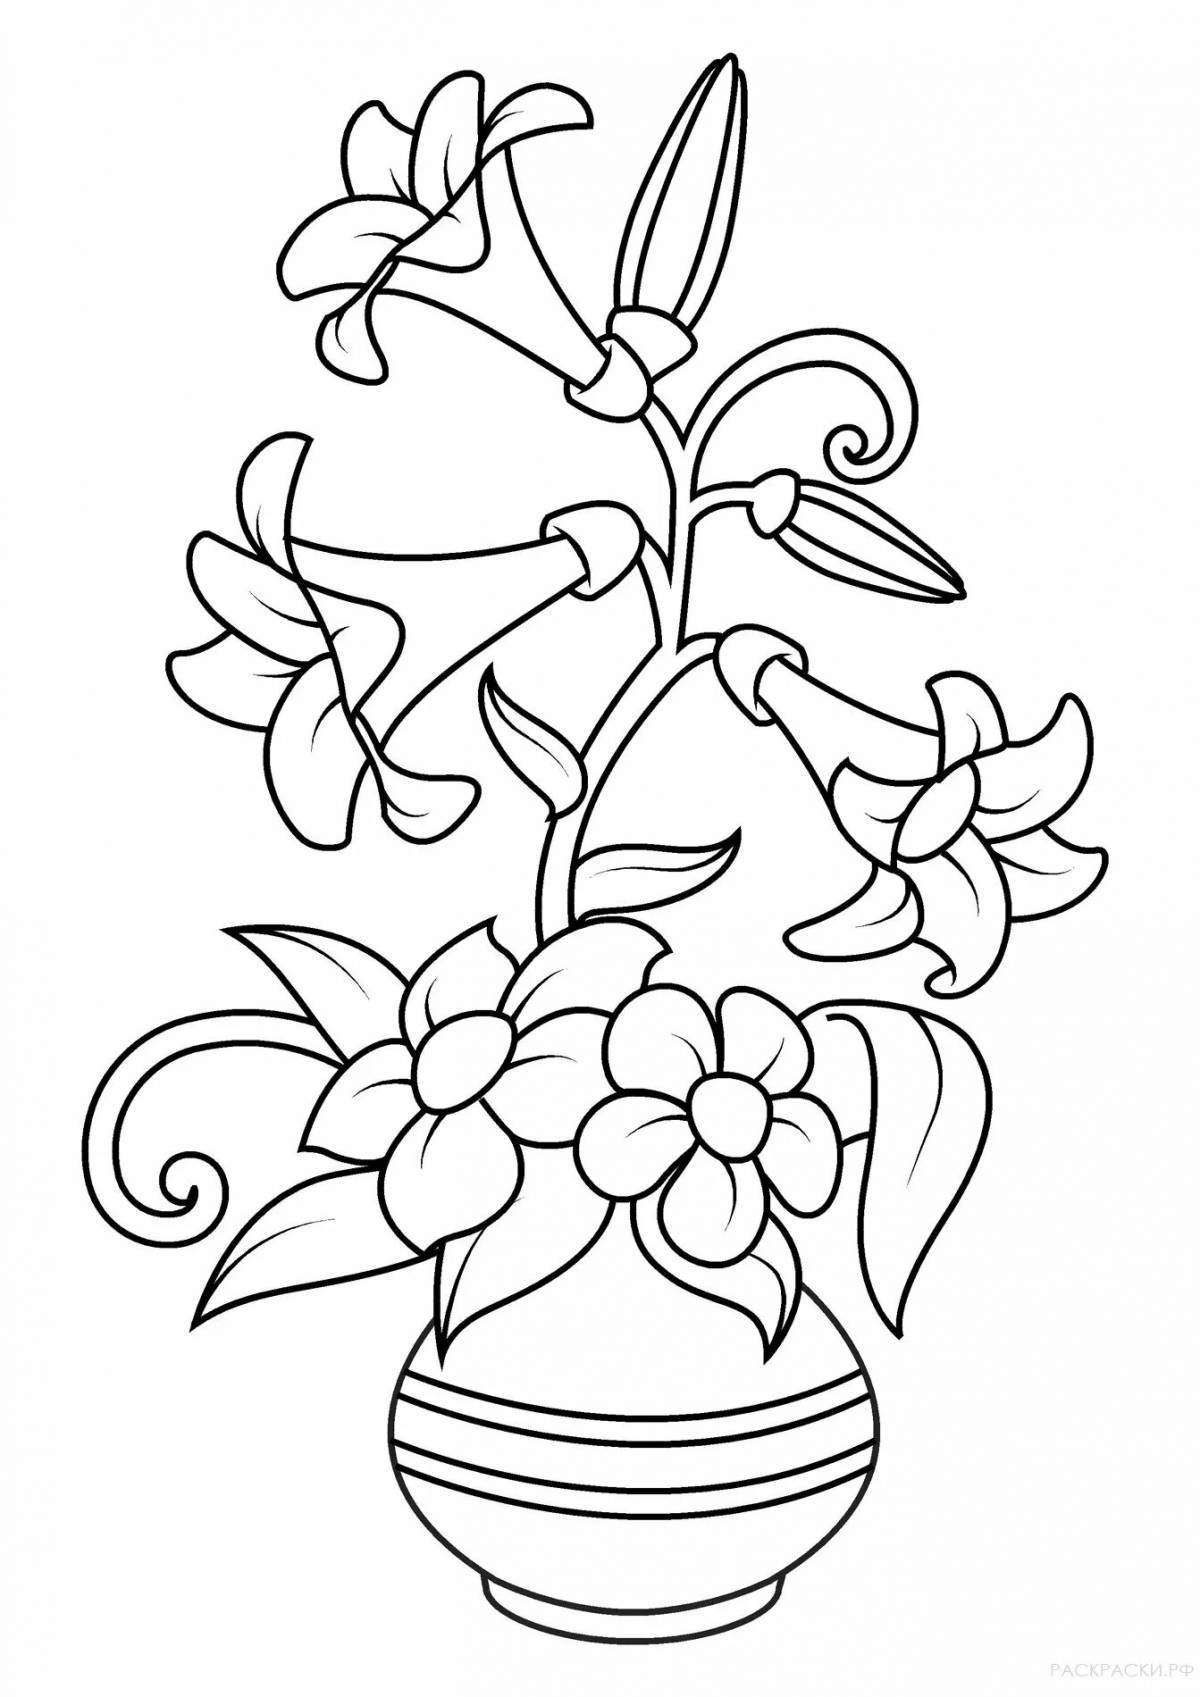 Adorable big flowers in a vase coloring book